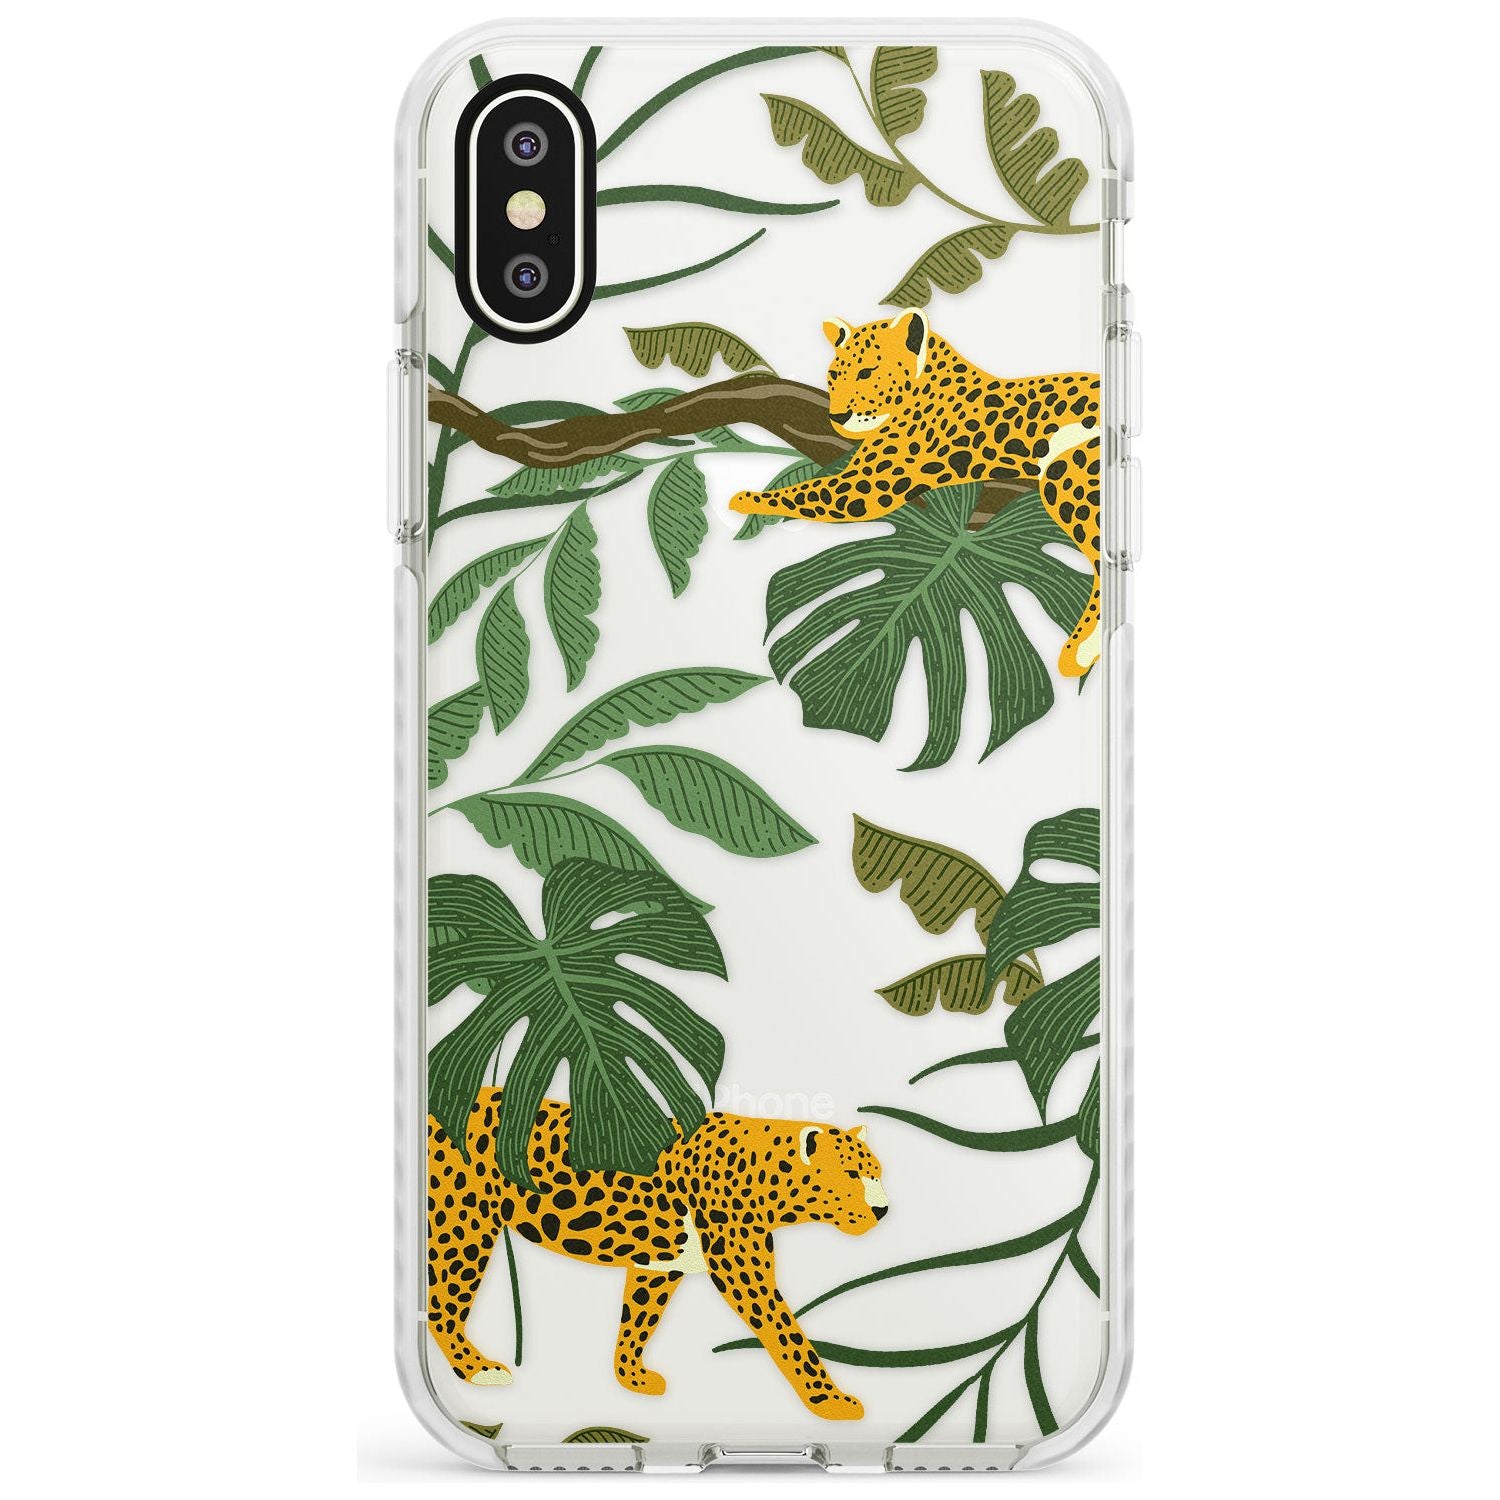 Two Jaguars & Foliage Jungle Cat Pattern Impact Phone Case for iPhone X XS Max XR